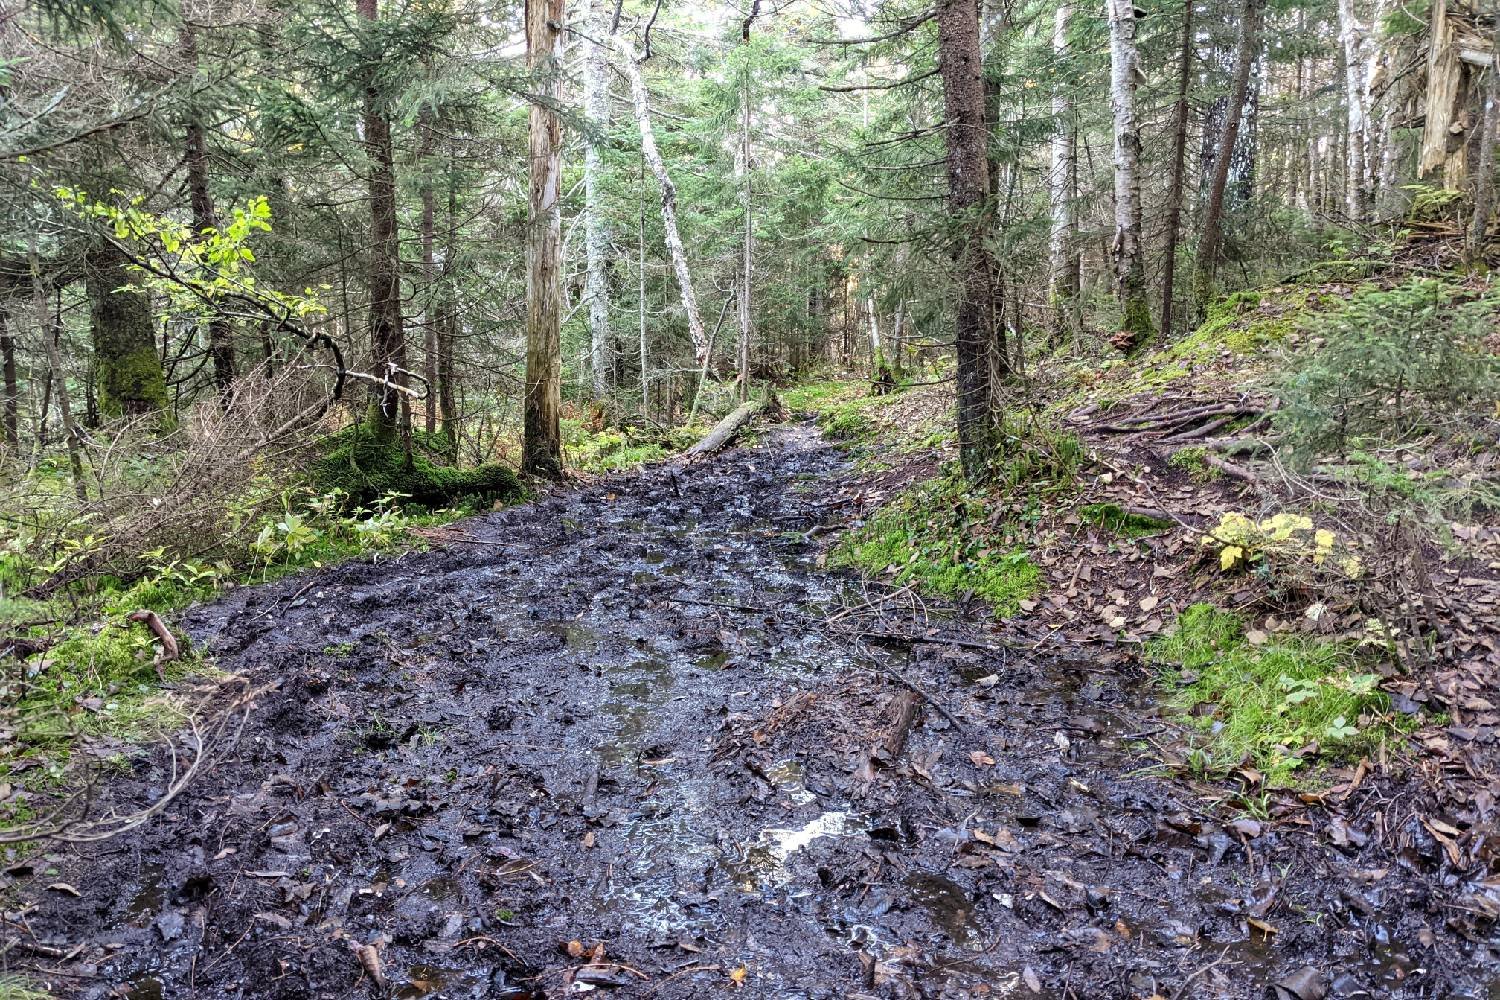 A very muddy section of the Long Trail